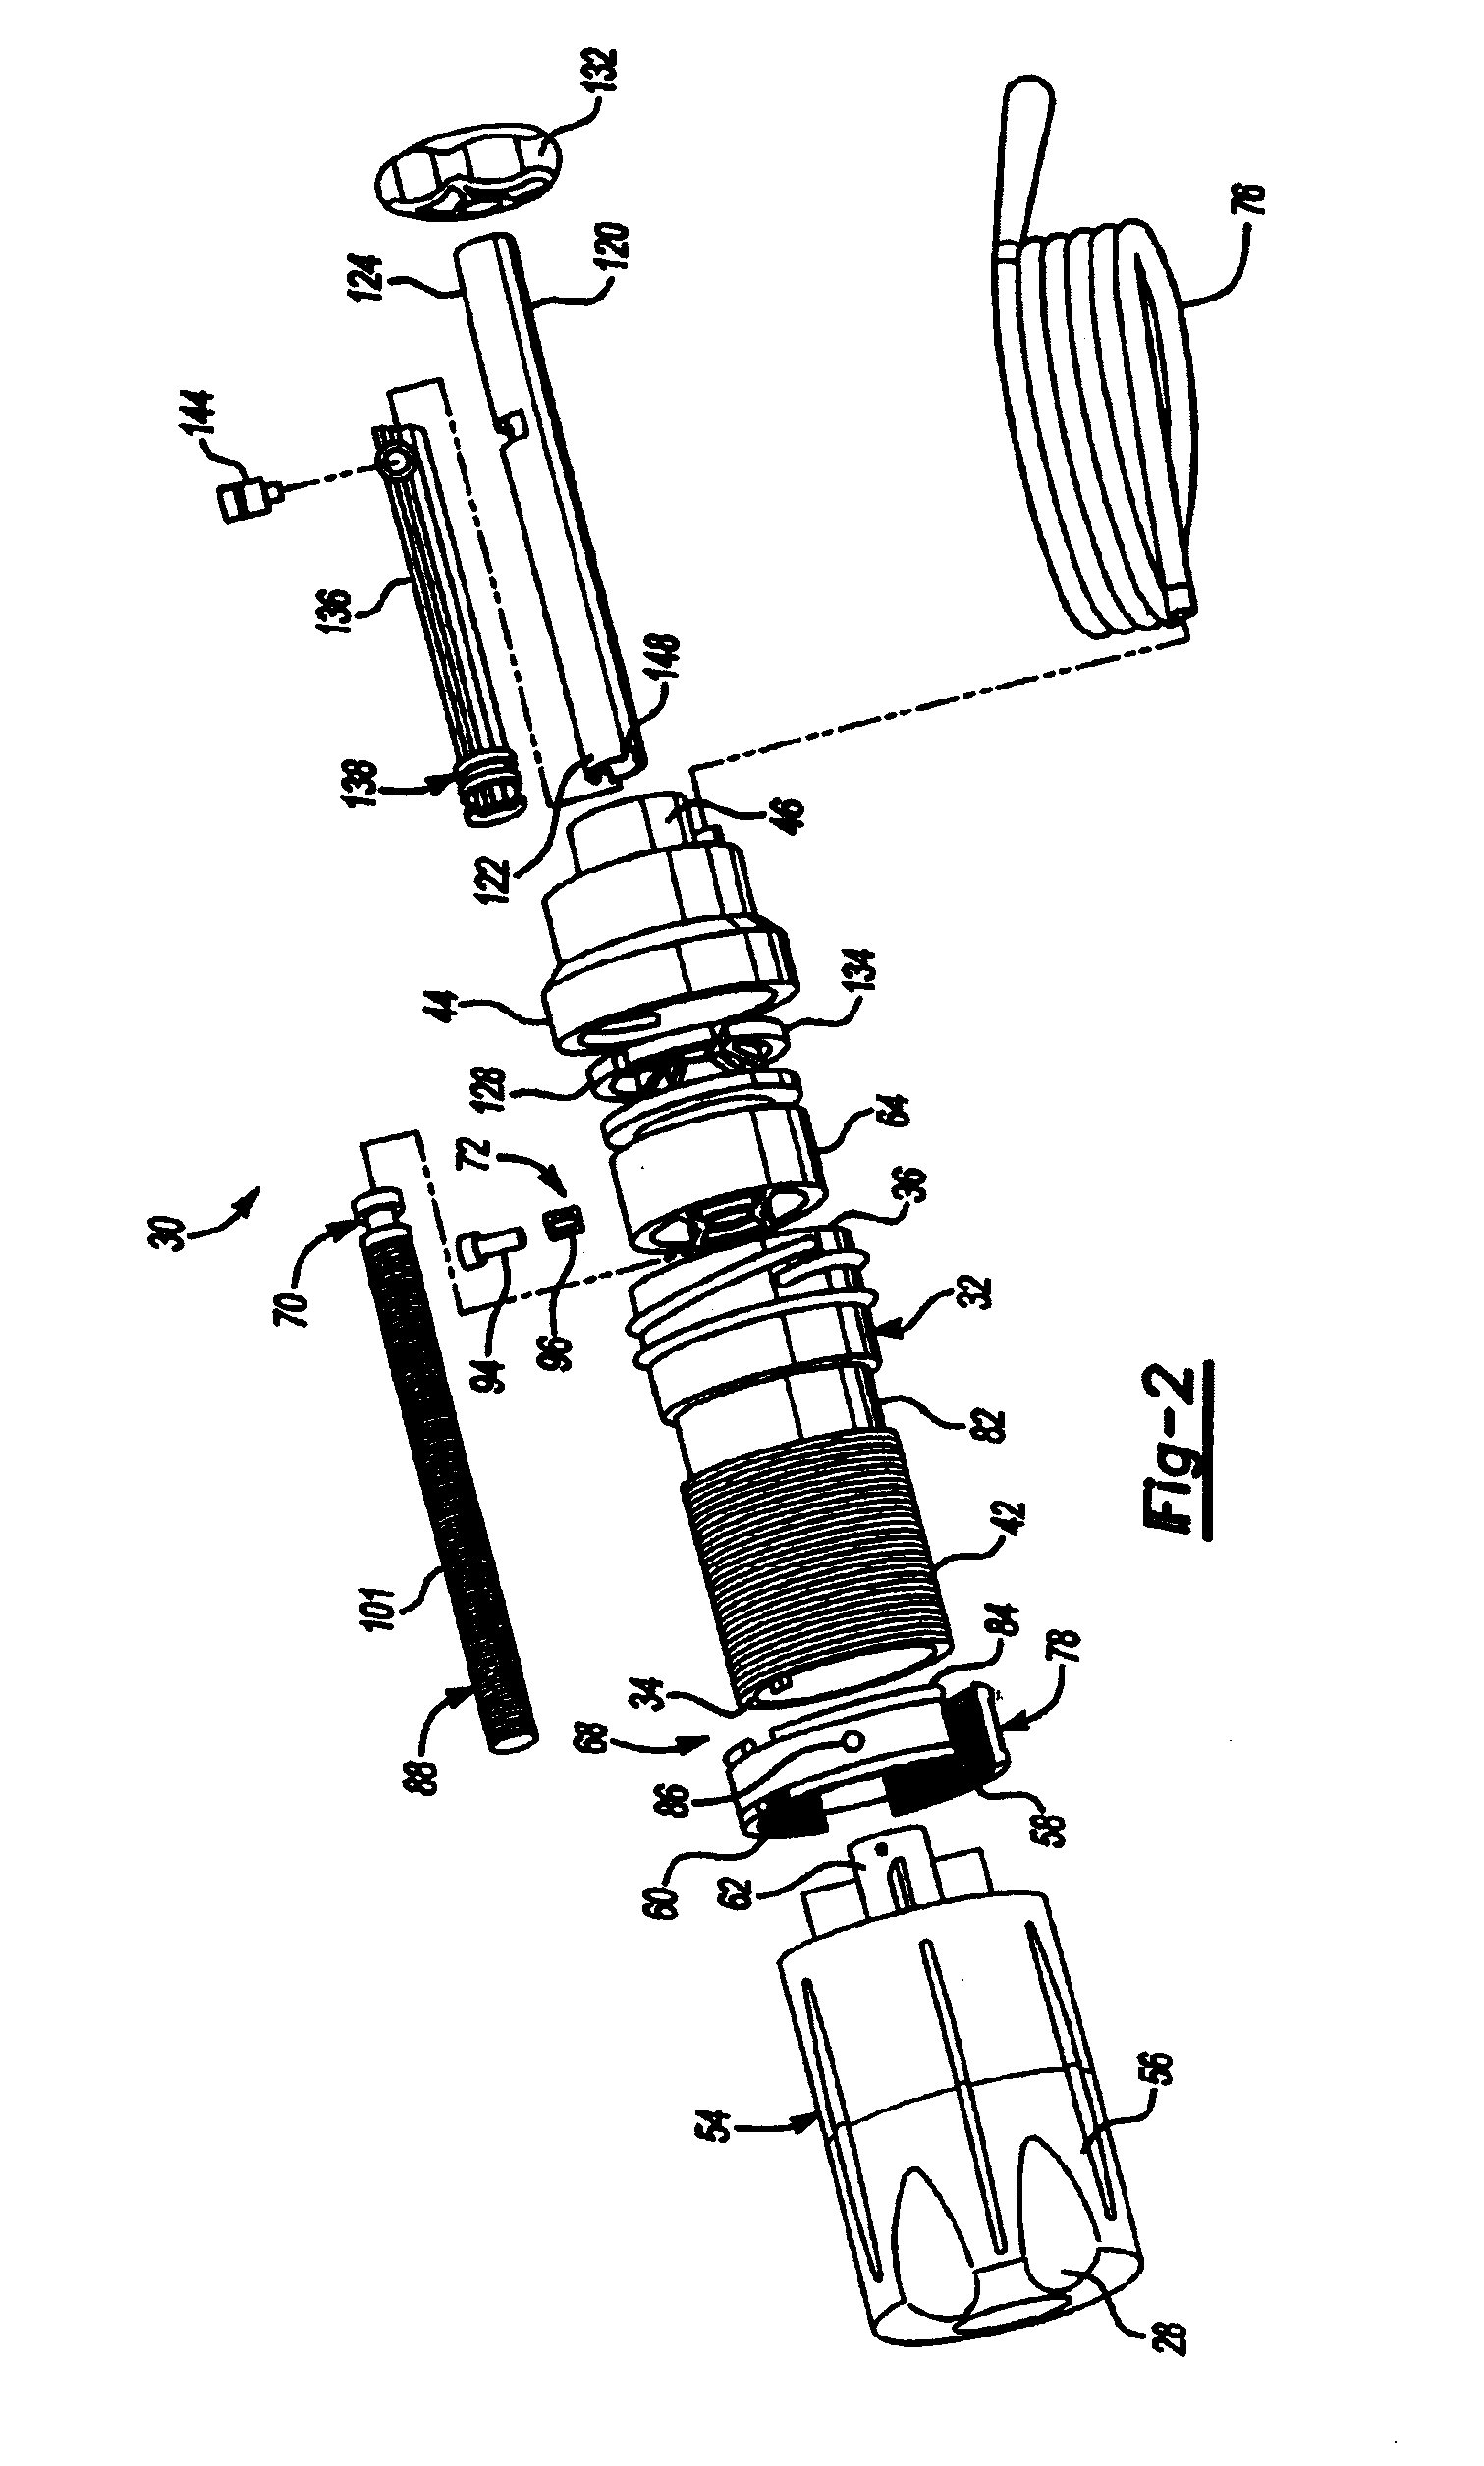 Bone cement mixing and delivery device with releasable mixing blade